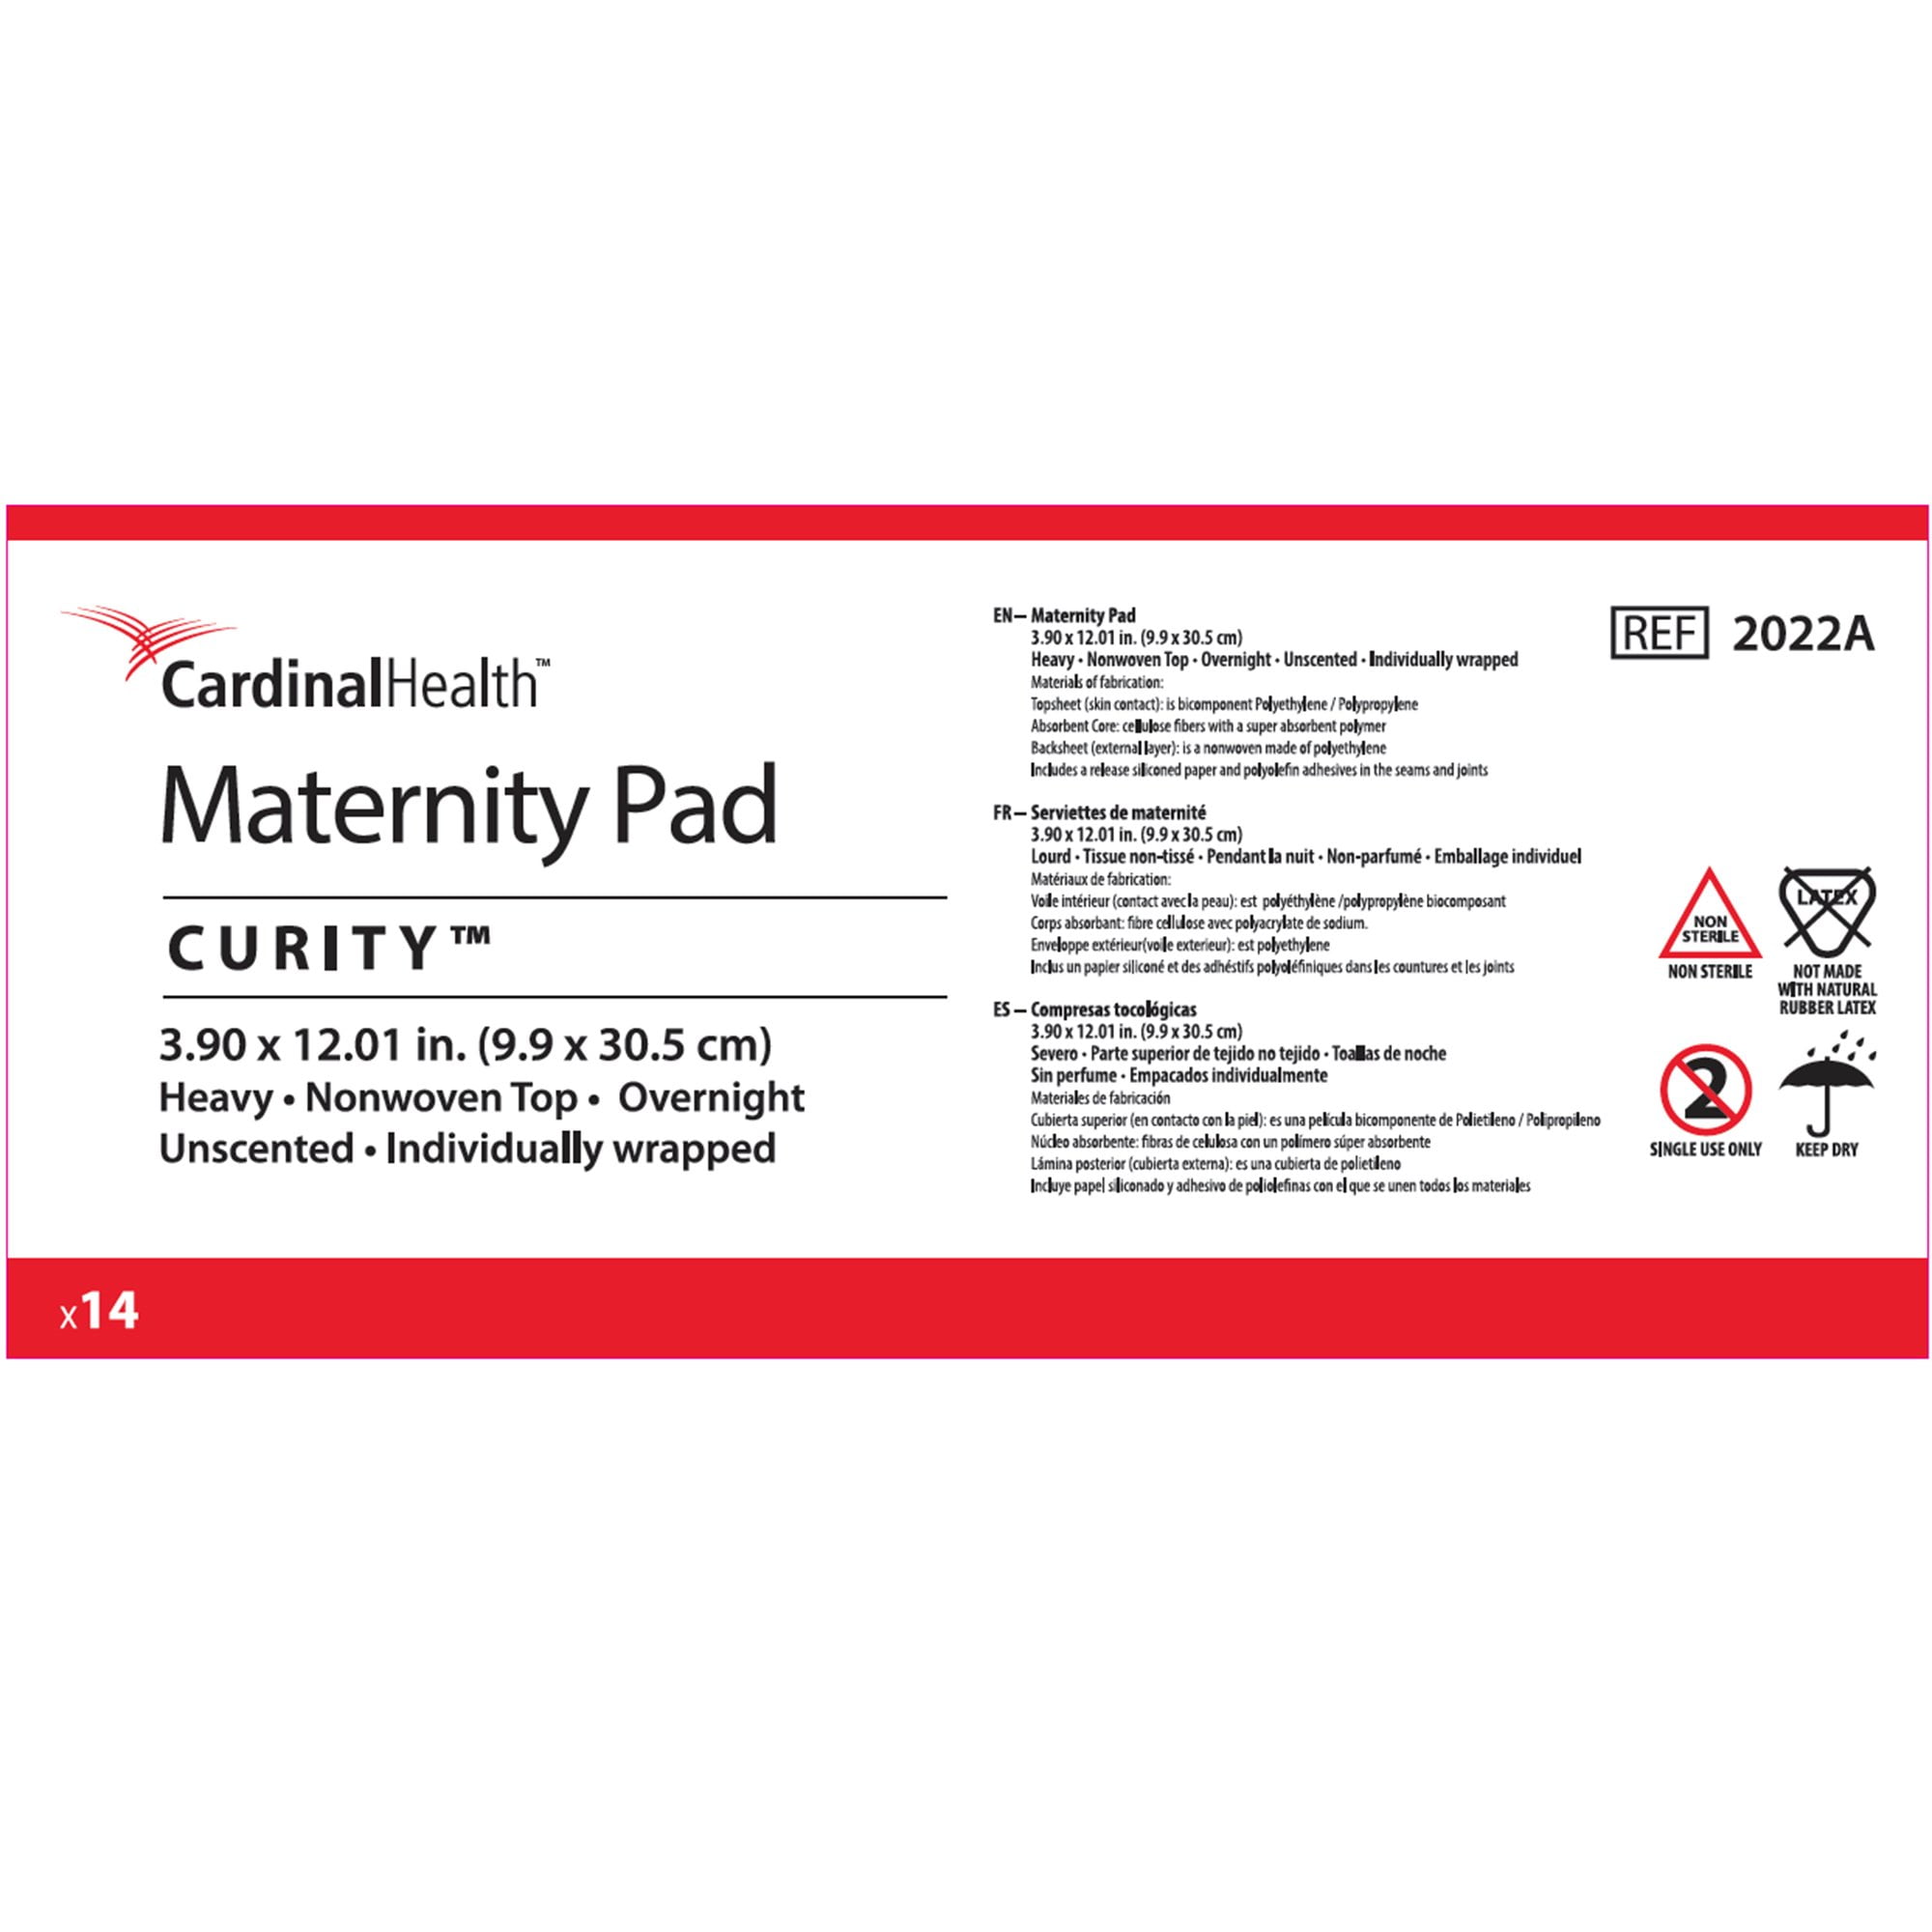 Curity OB / Maternity Curity Super Absorbency Pad, 14 Ct, 4 Pack 